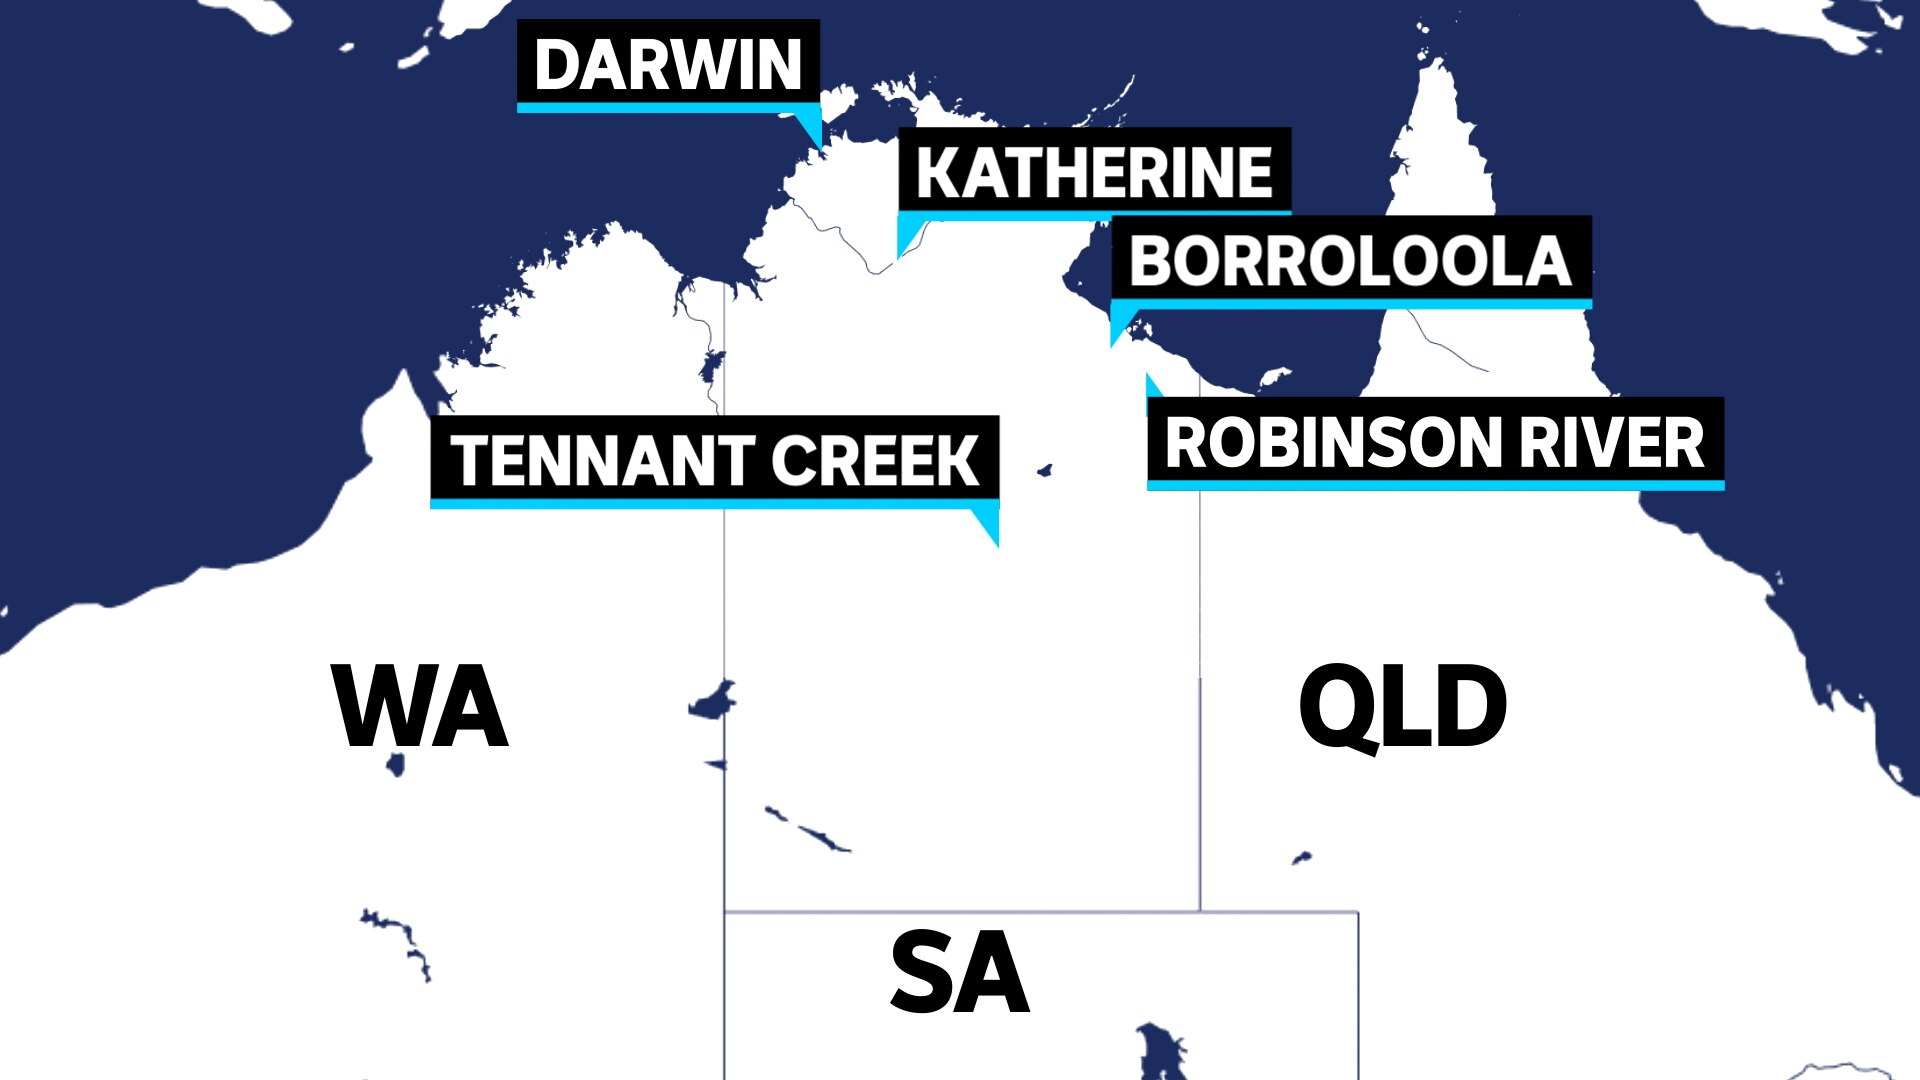 A map of the Northern Territory showing major towns.